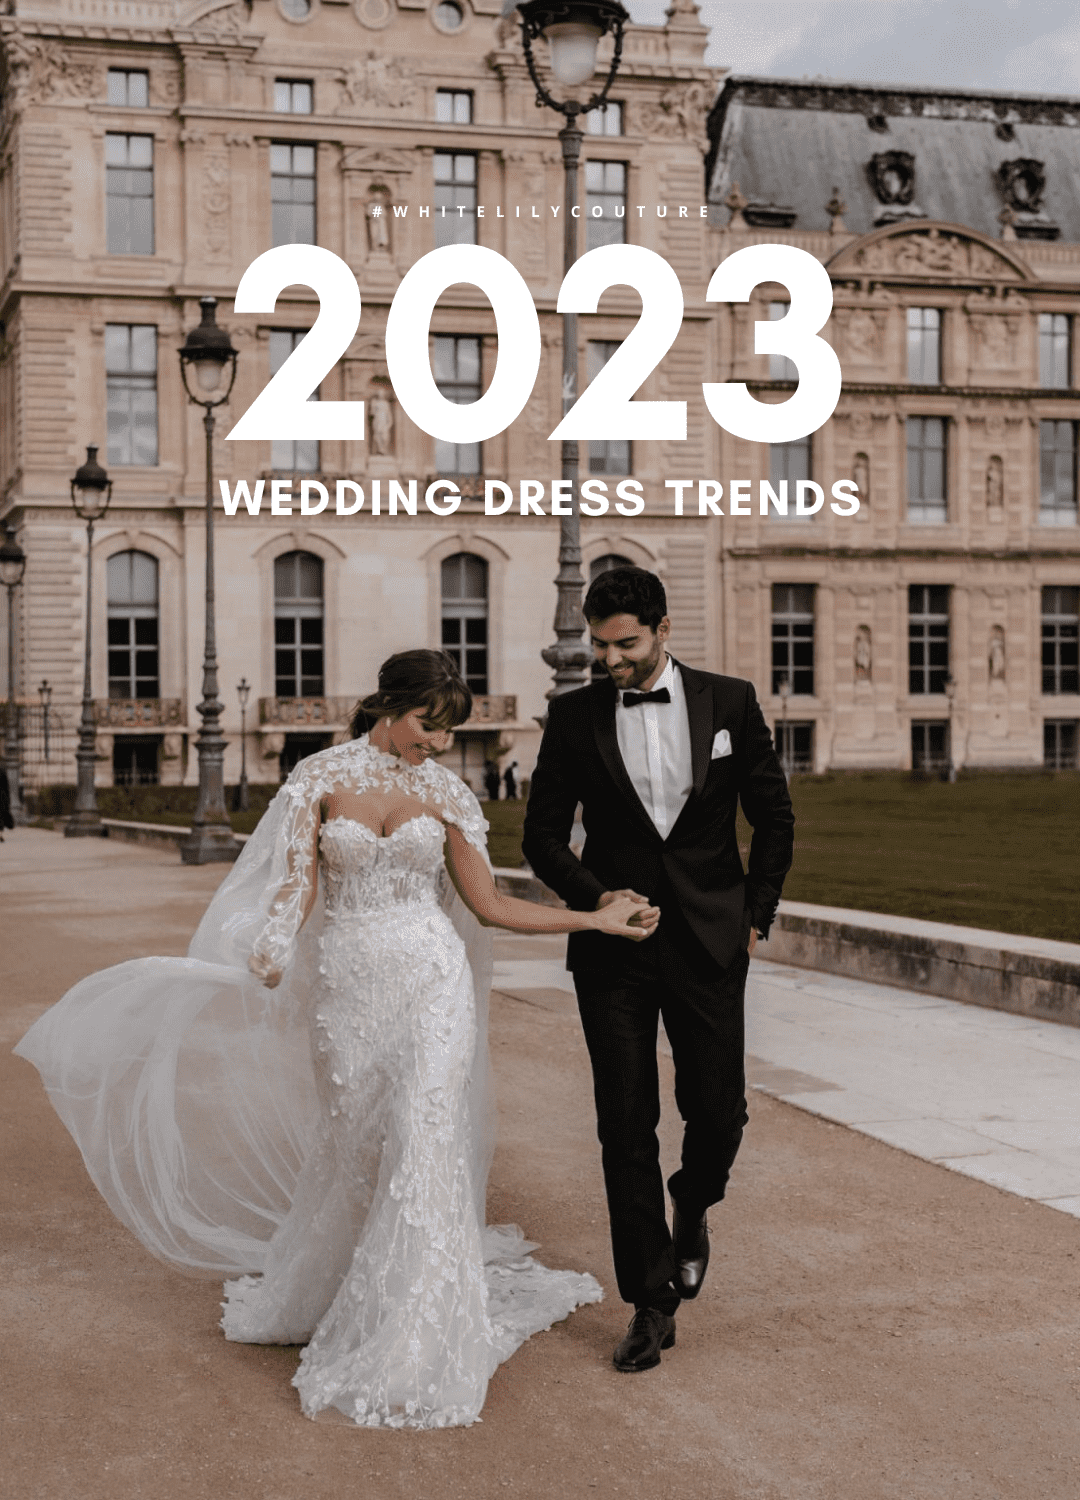 5 Wedding Dress Trends For 2023 - White Lily Couture